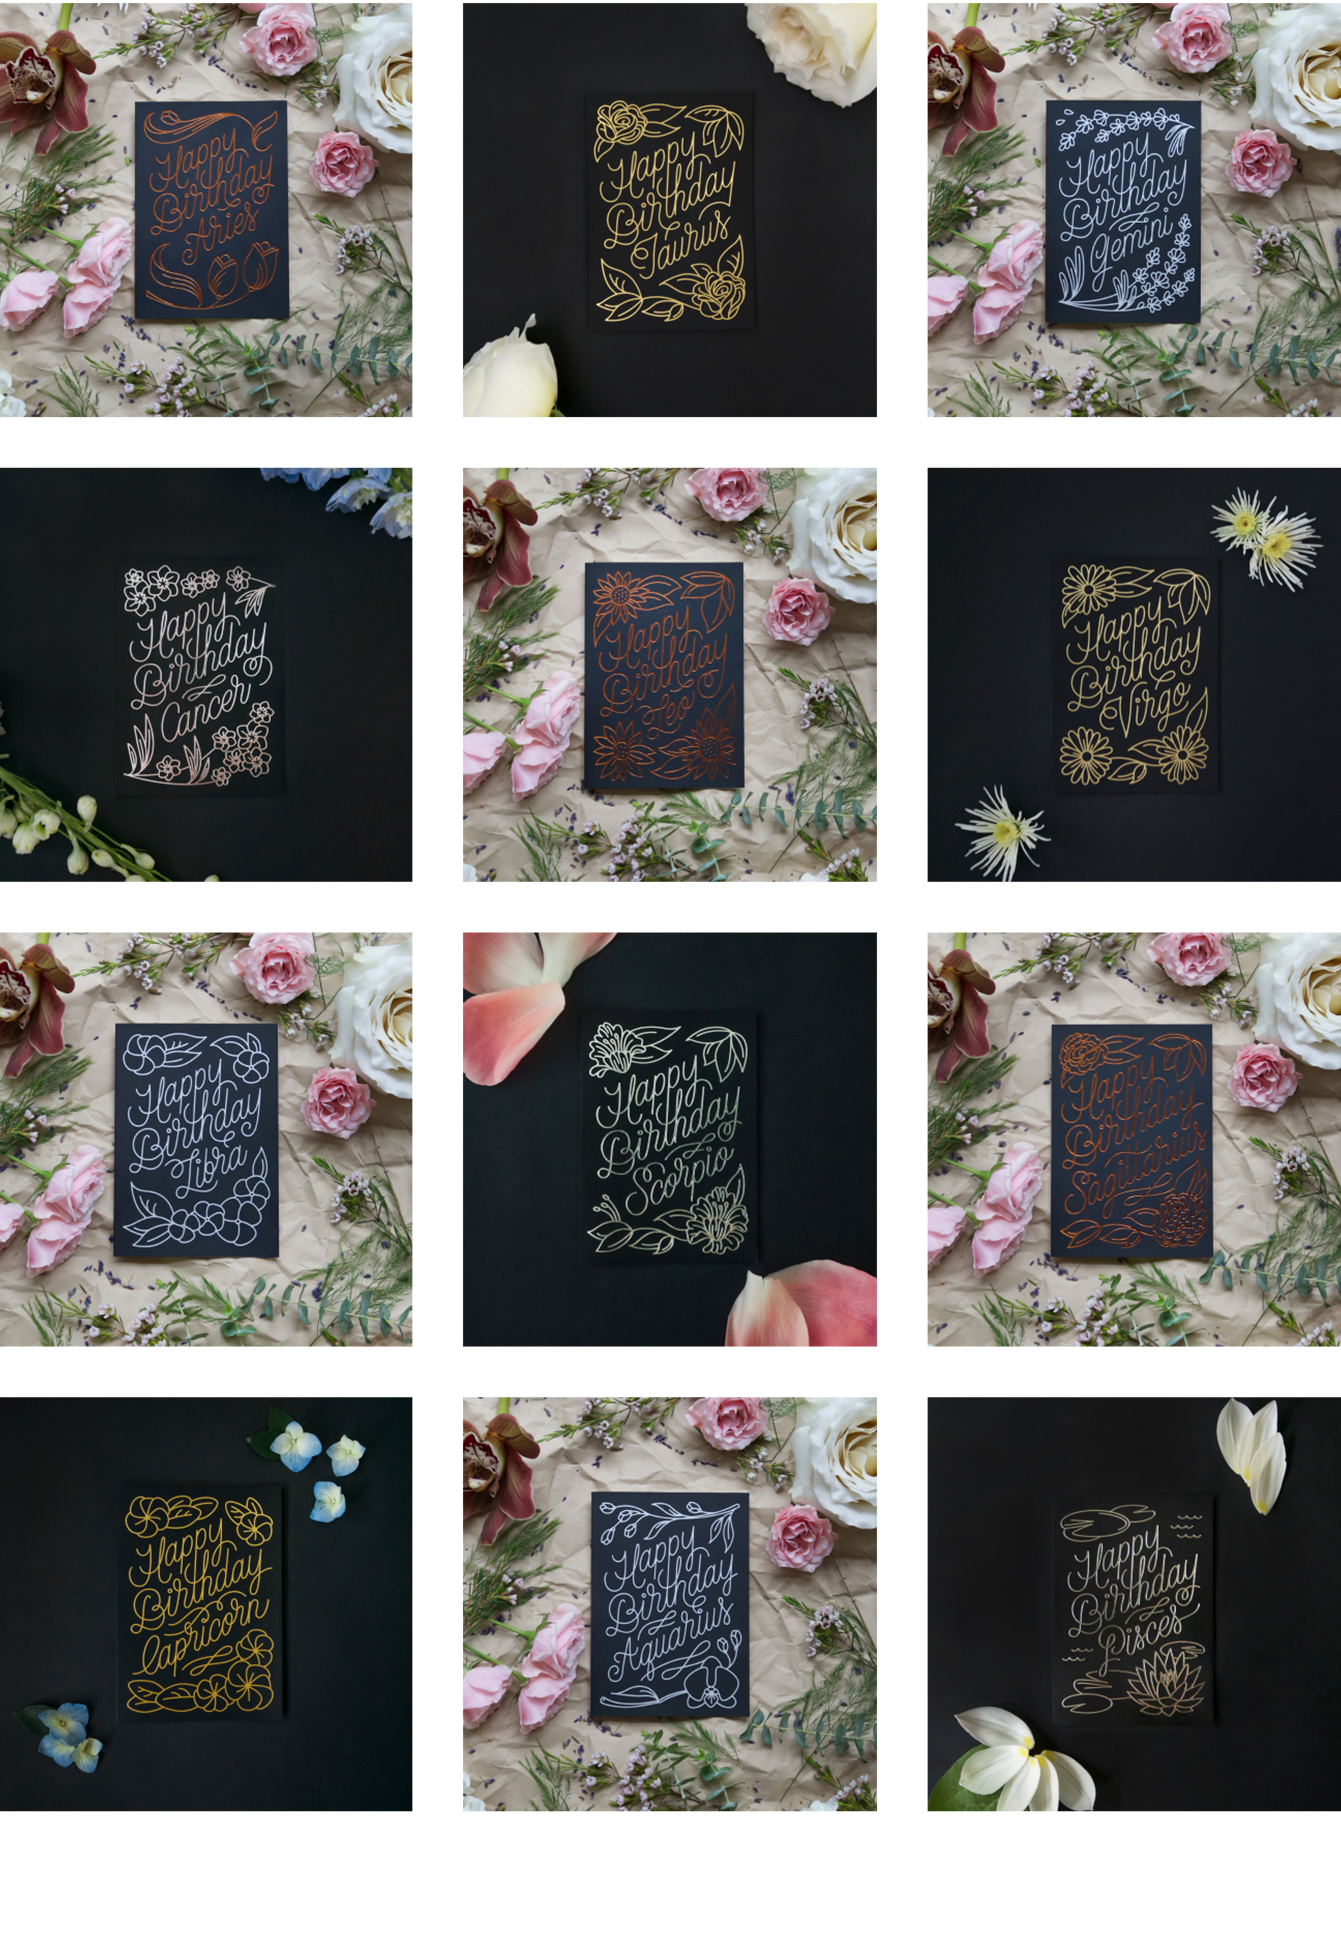 Black screen printed & foil stamped Zodiac Flora birthday cards for all 12 signs of the Zodiac. Designed by Gather & Seek (formerly Chelley Co.) in collaboration with Melissa Deckert.